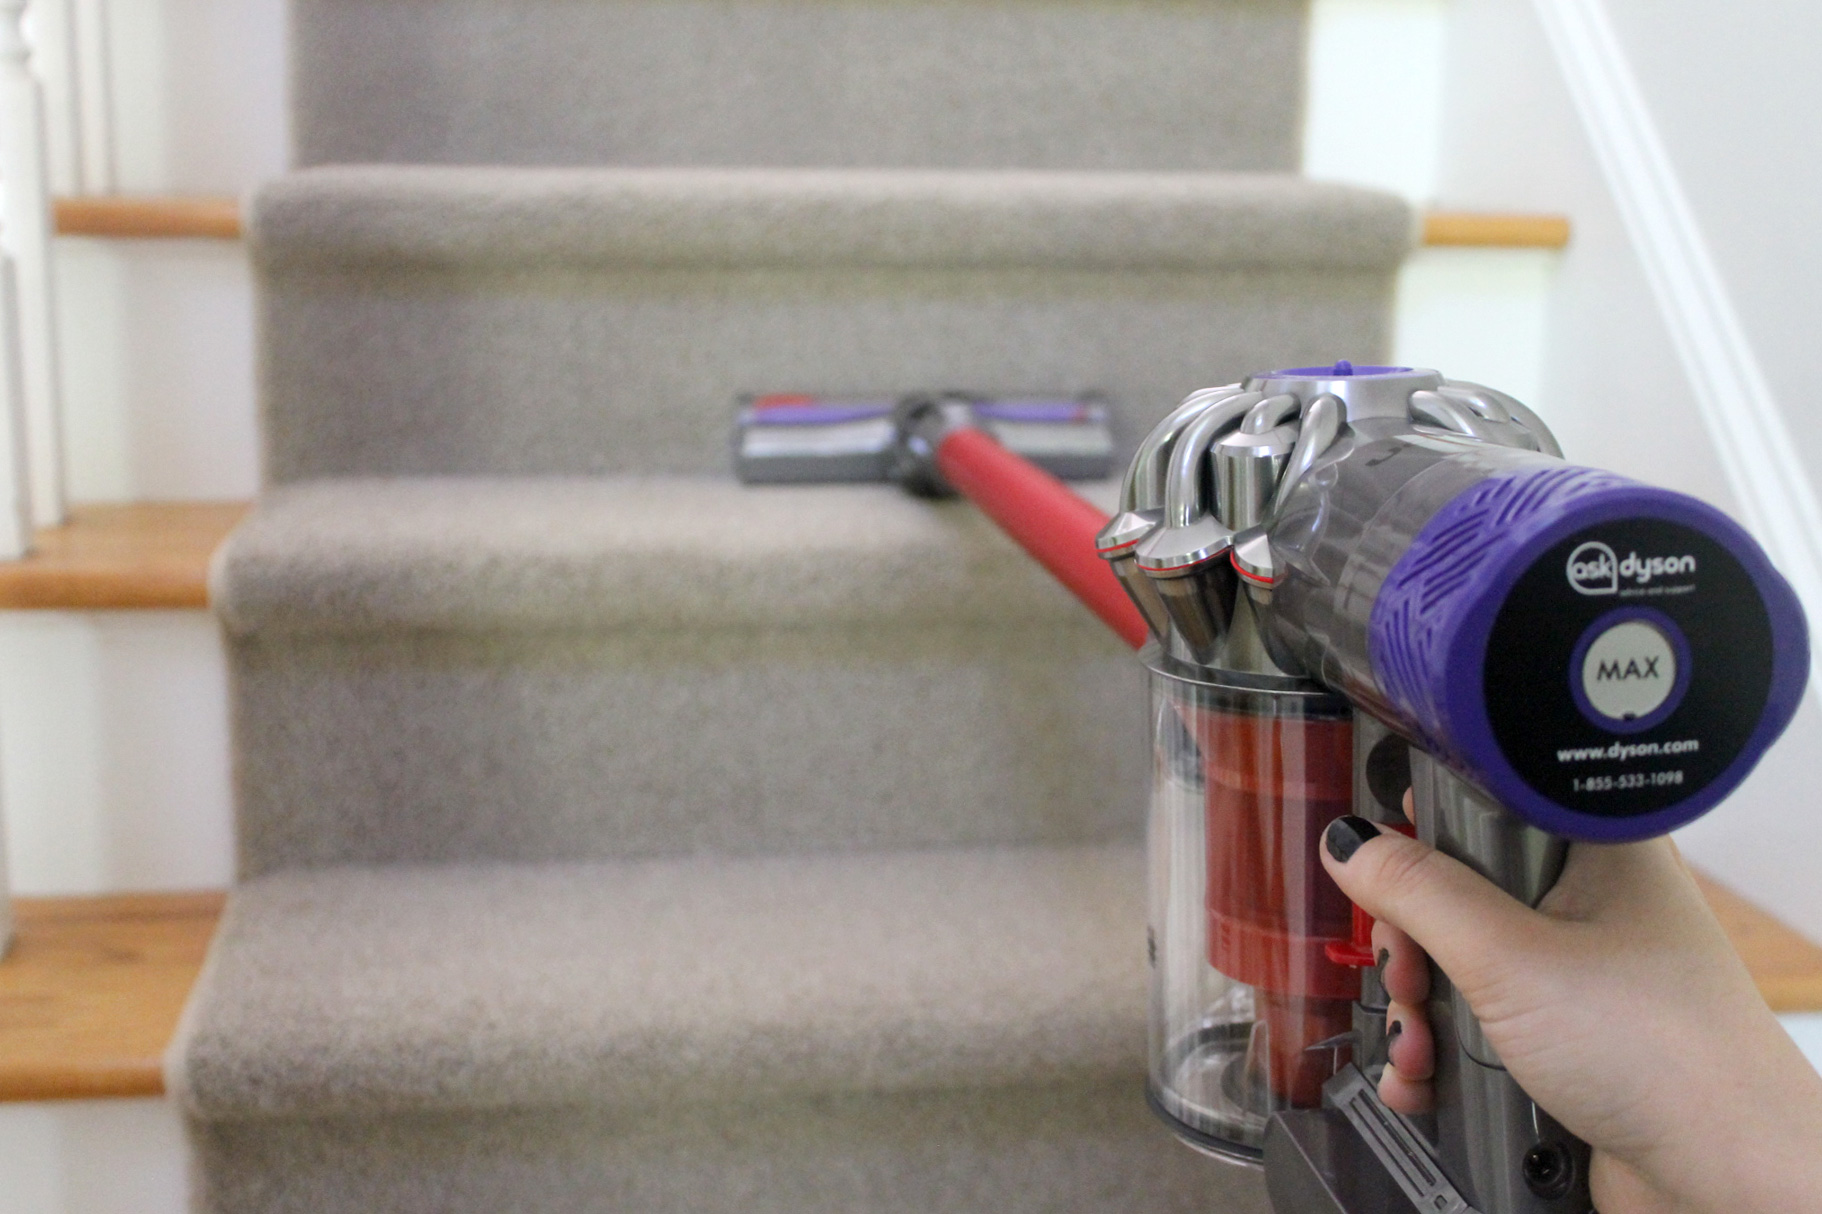 Parenting Must-Have: Dyson V6 Absolute Cord-Free Vacuum